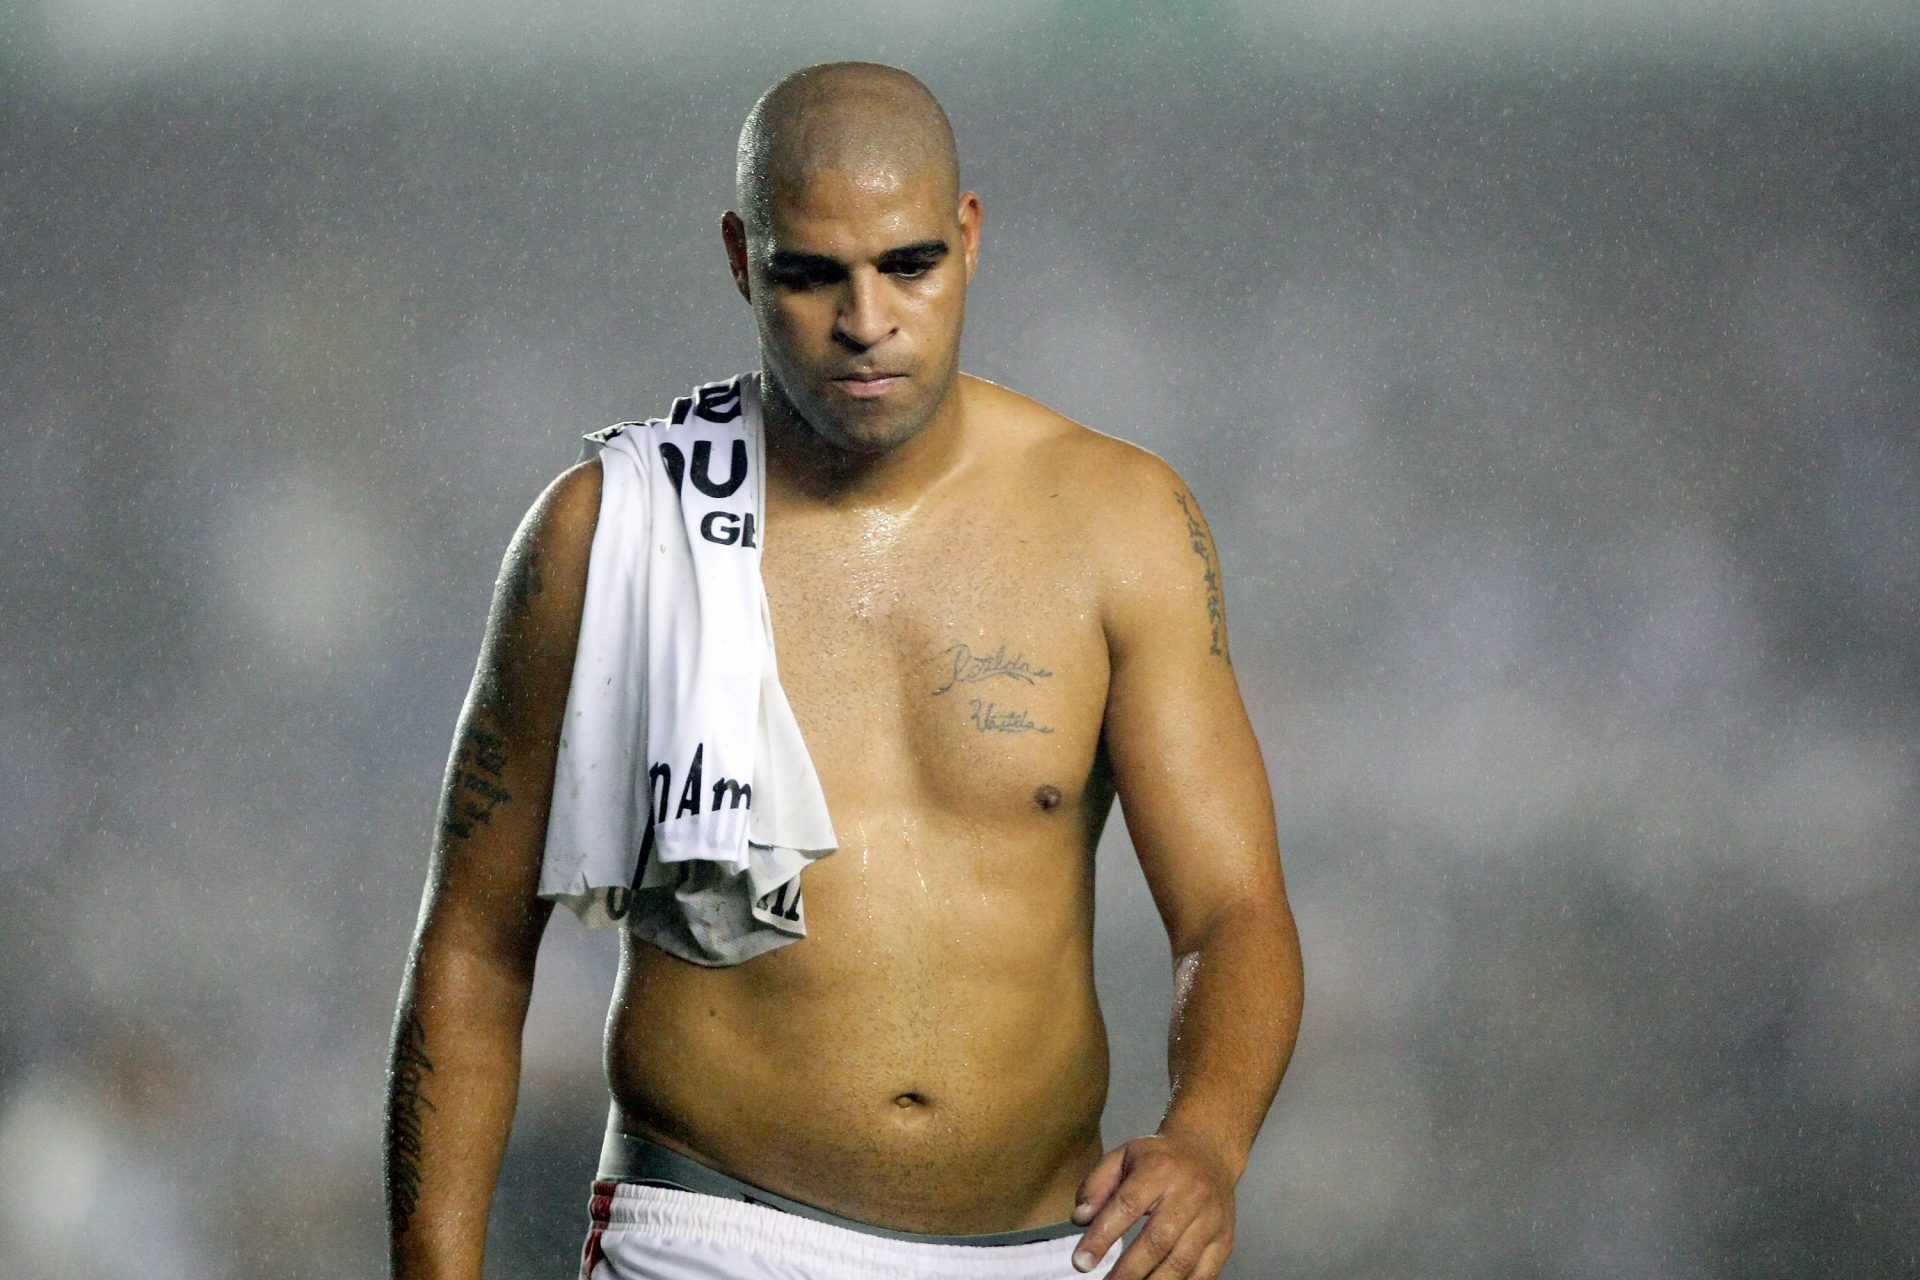 <p><span>The player began to frequent the favelas again and, in 2016, when he retired, the Brazilian newspaper El Globo claimed that Adriano has become a member of the oldest criminal gang in Rio de Janeiro, called Red Command.</span></p>